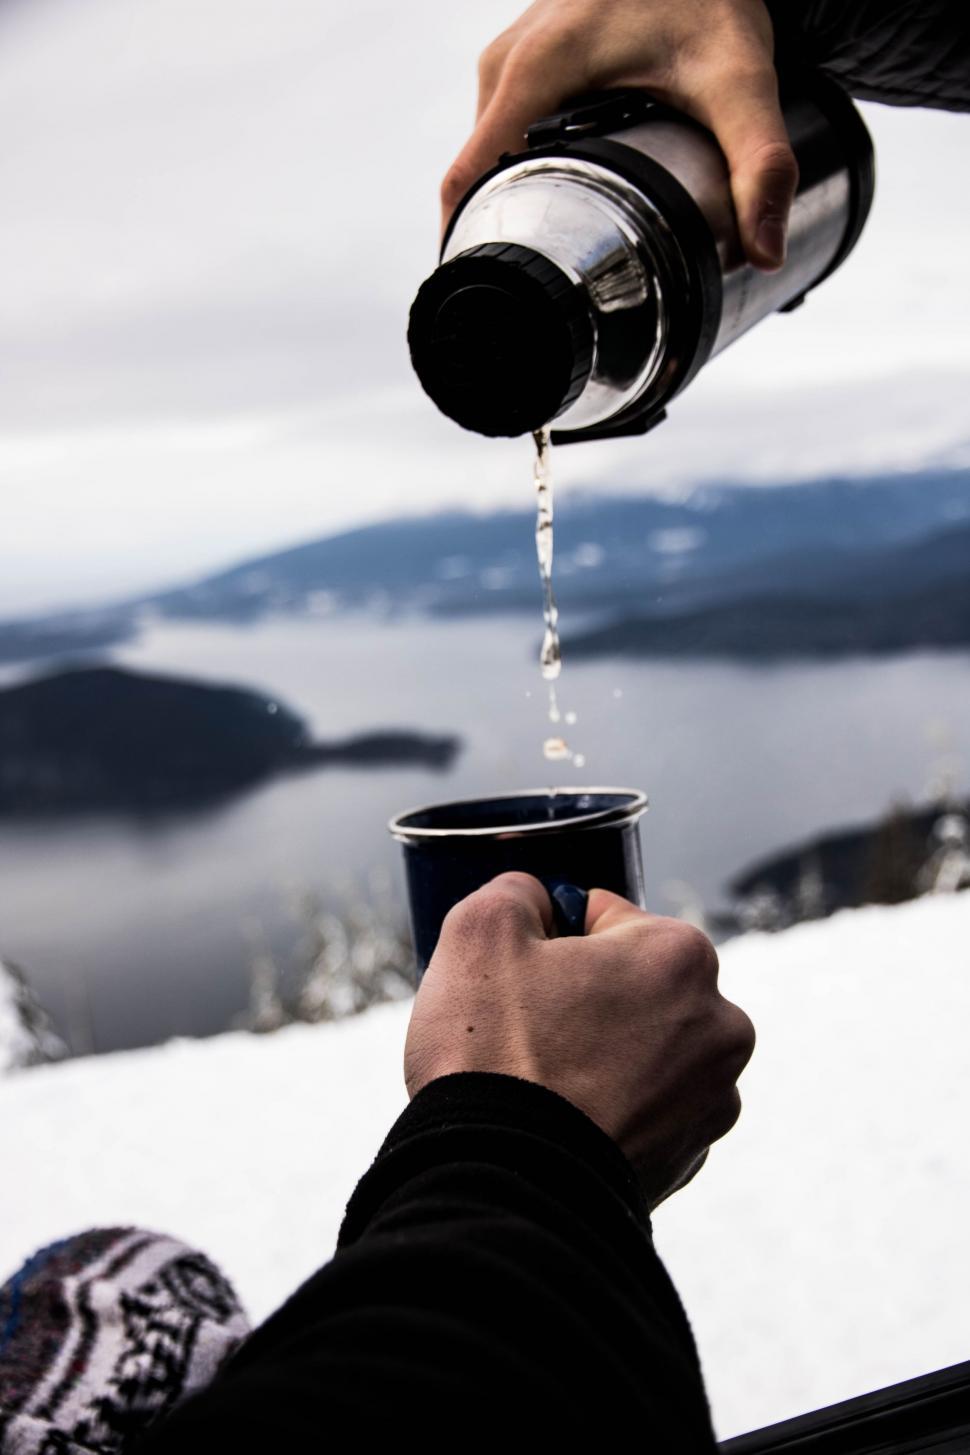 Free Image of Person Pouring Liquid Into Cup in Snow 